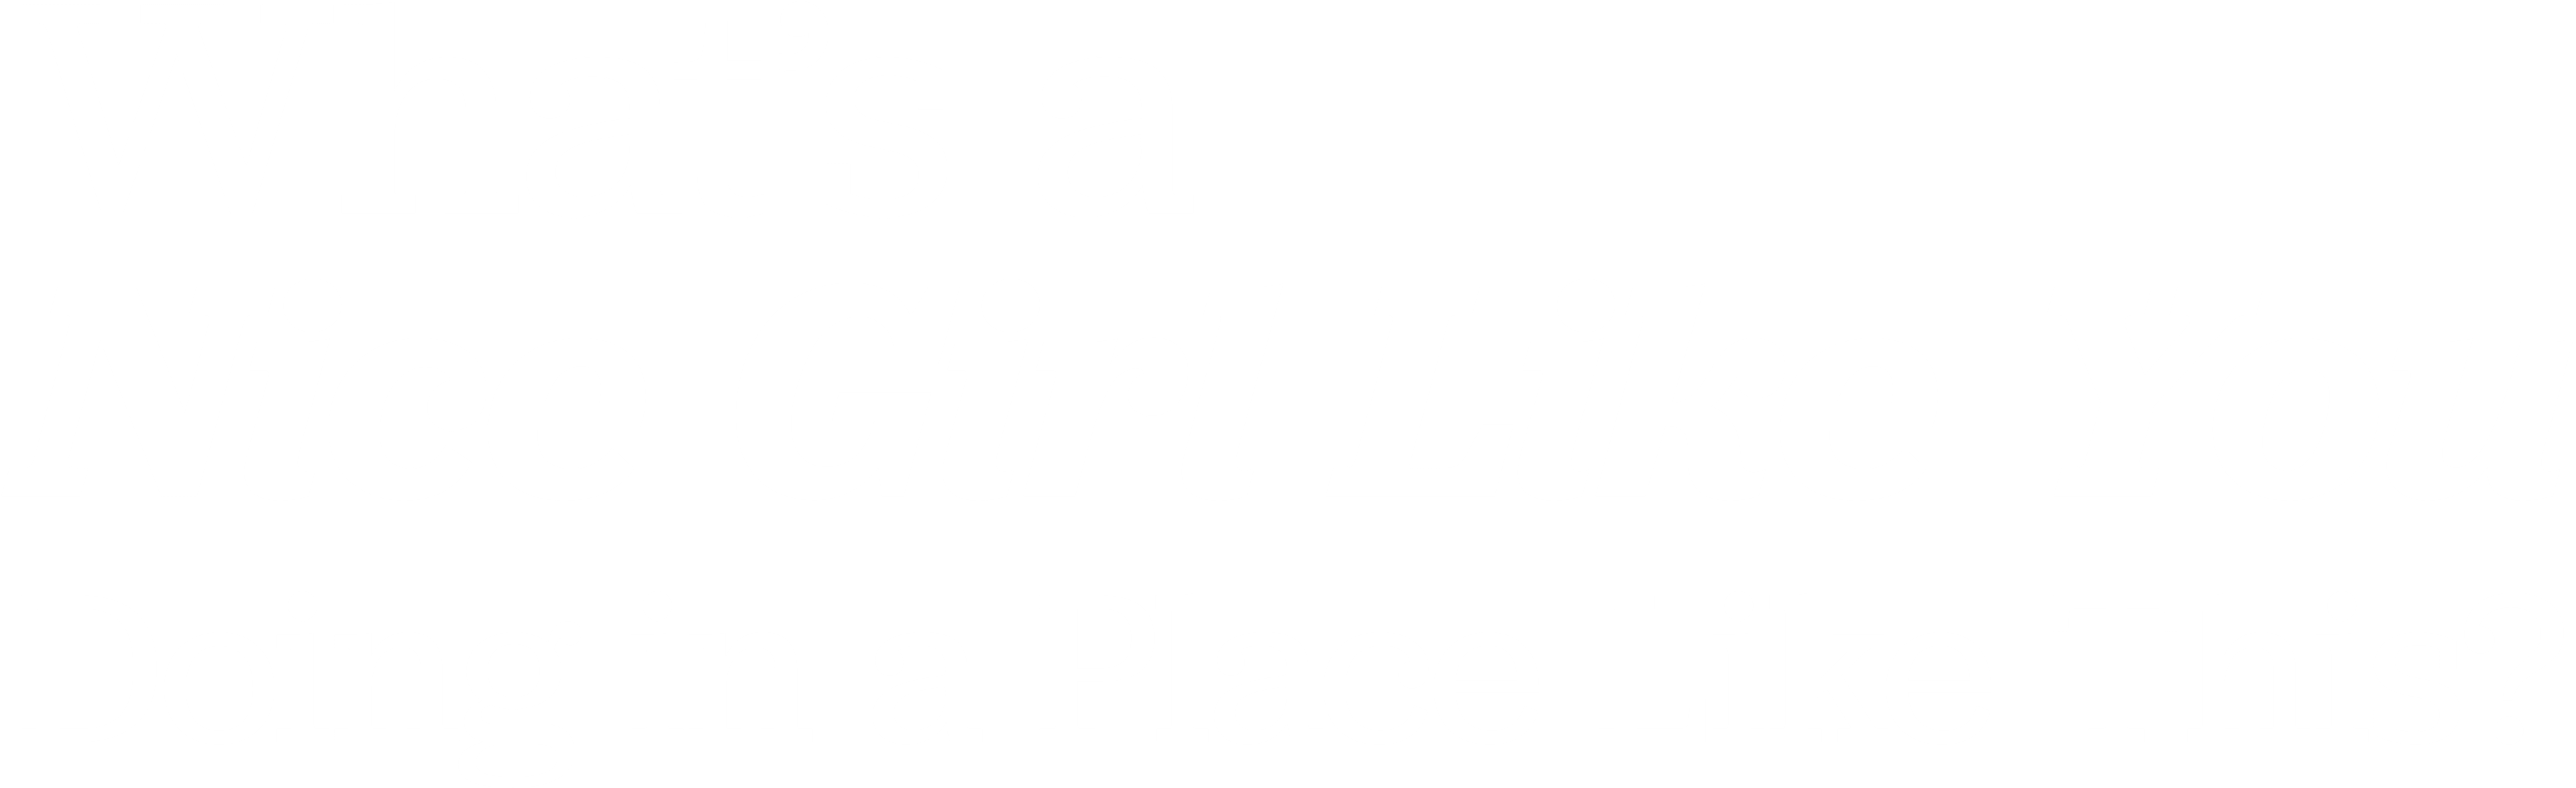 What's a Nice Girl Like You Doing in a Place Like This? logo